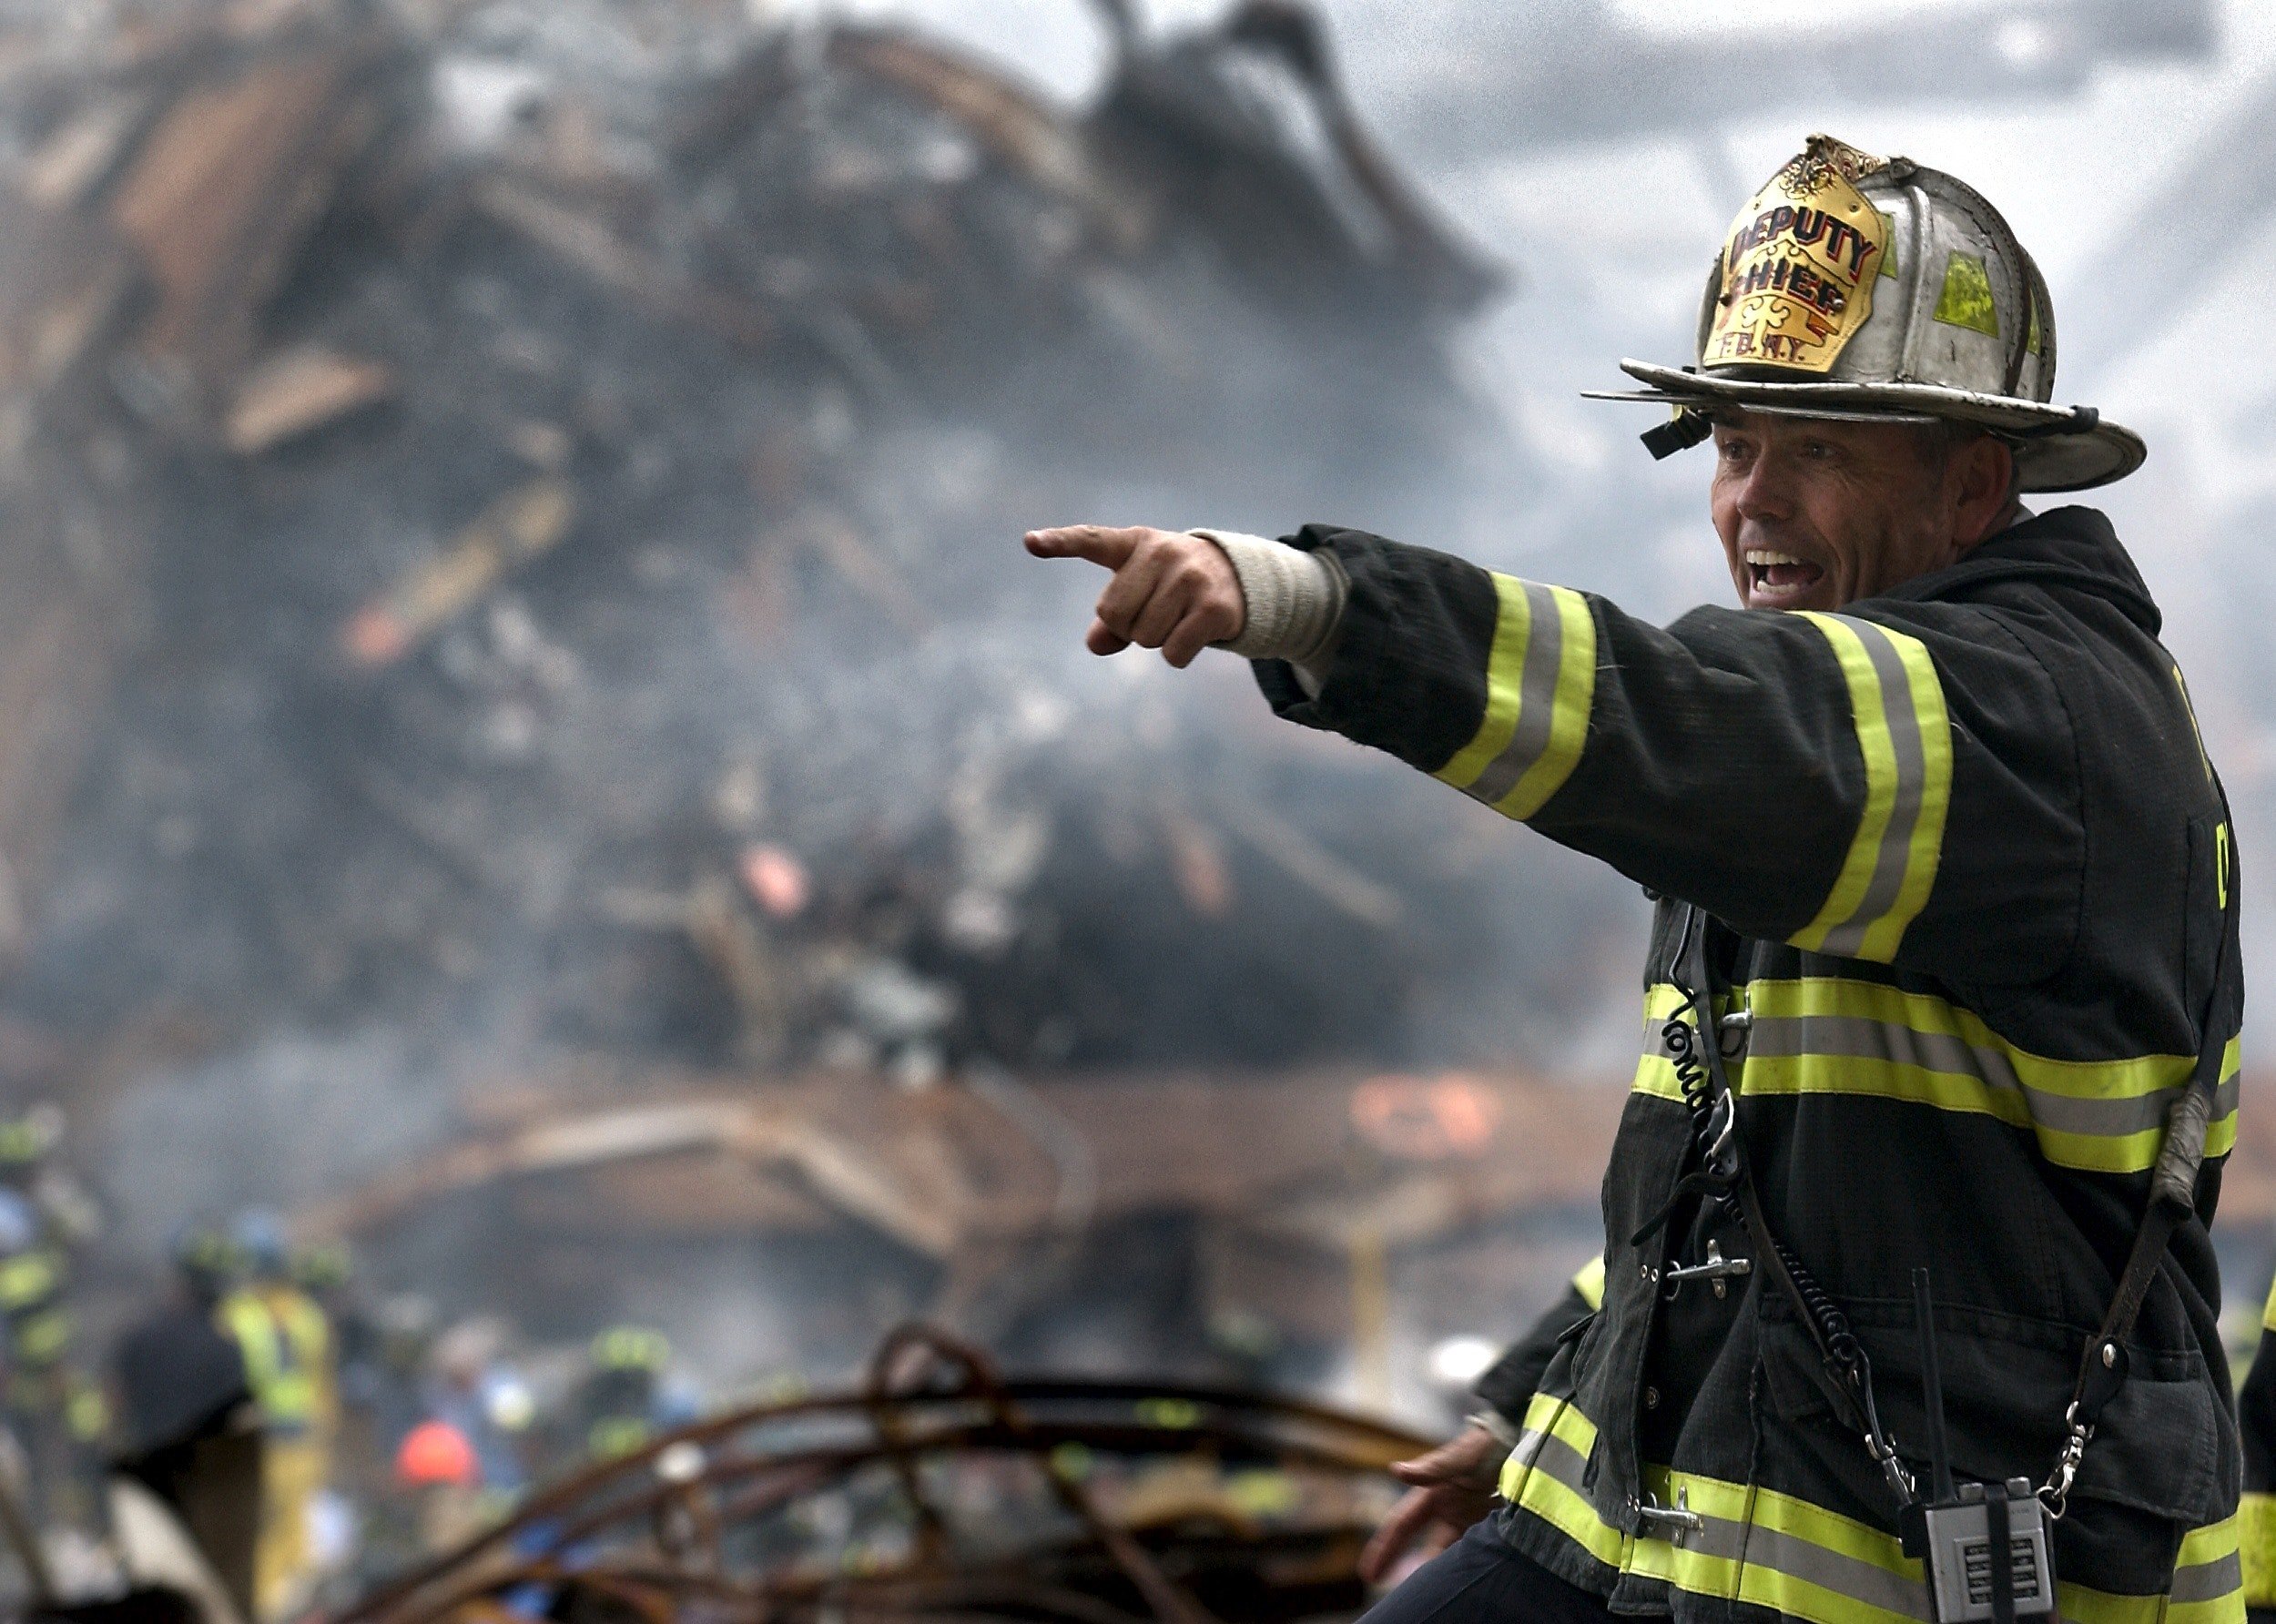 Pictured - A firefighter wearing a black and yellow uniform pointing | Source: Pexels 